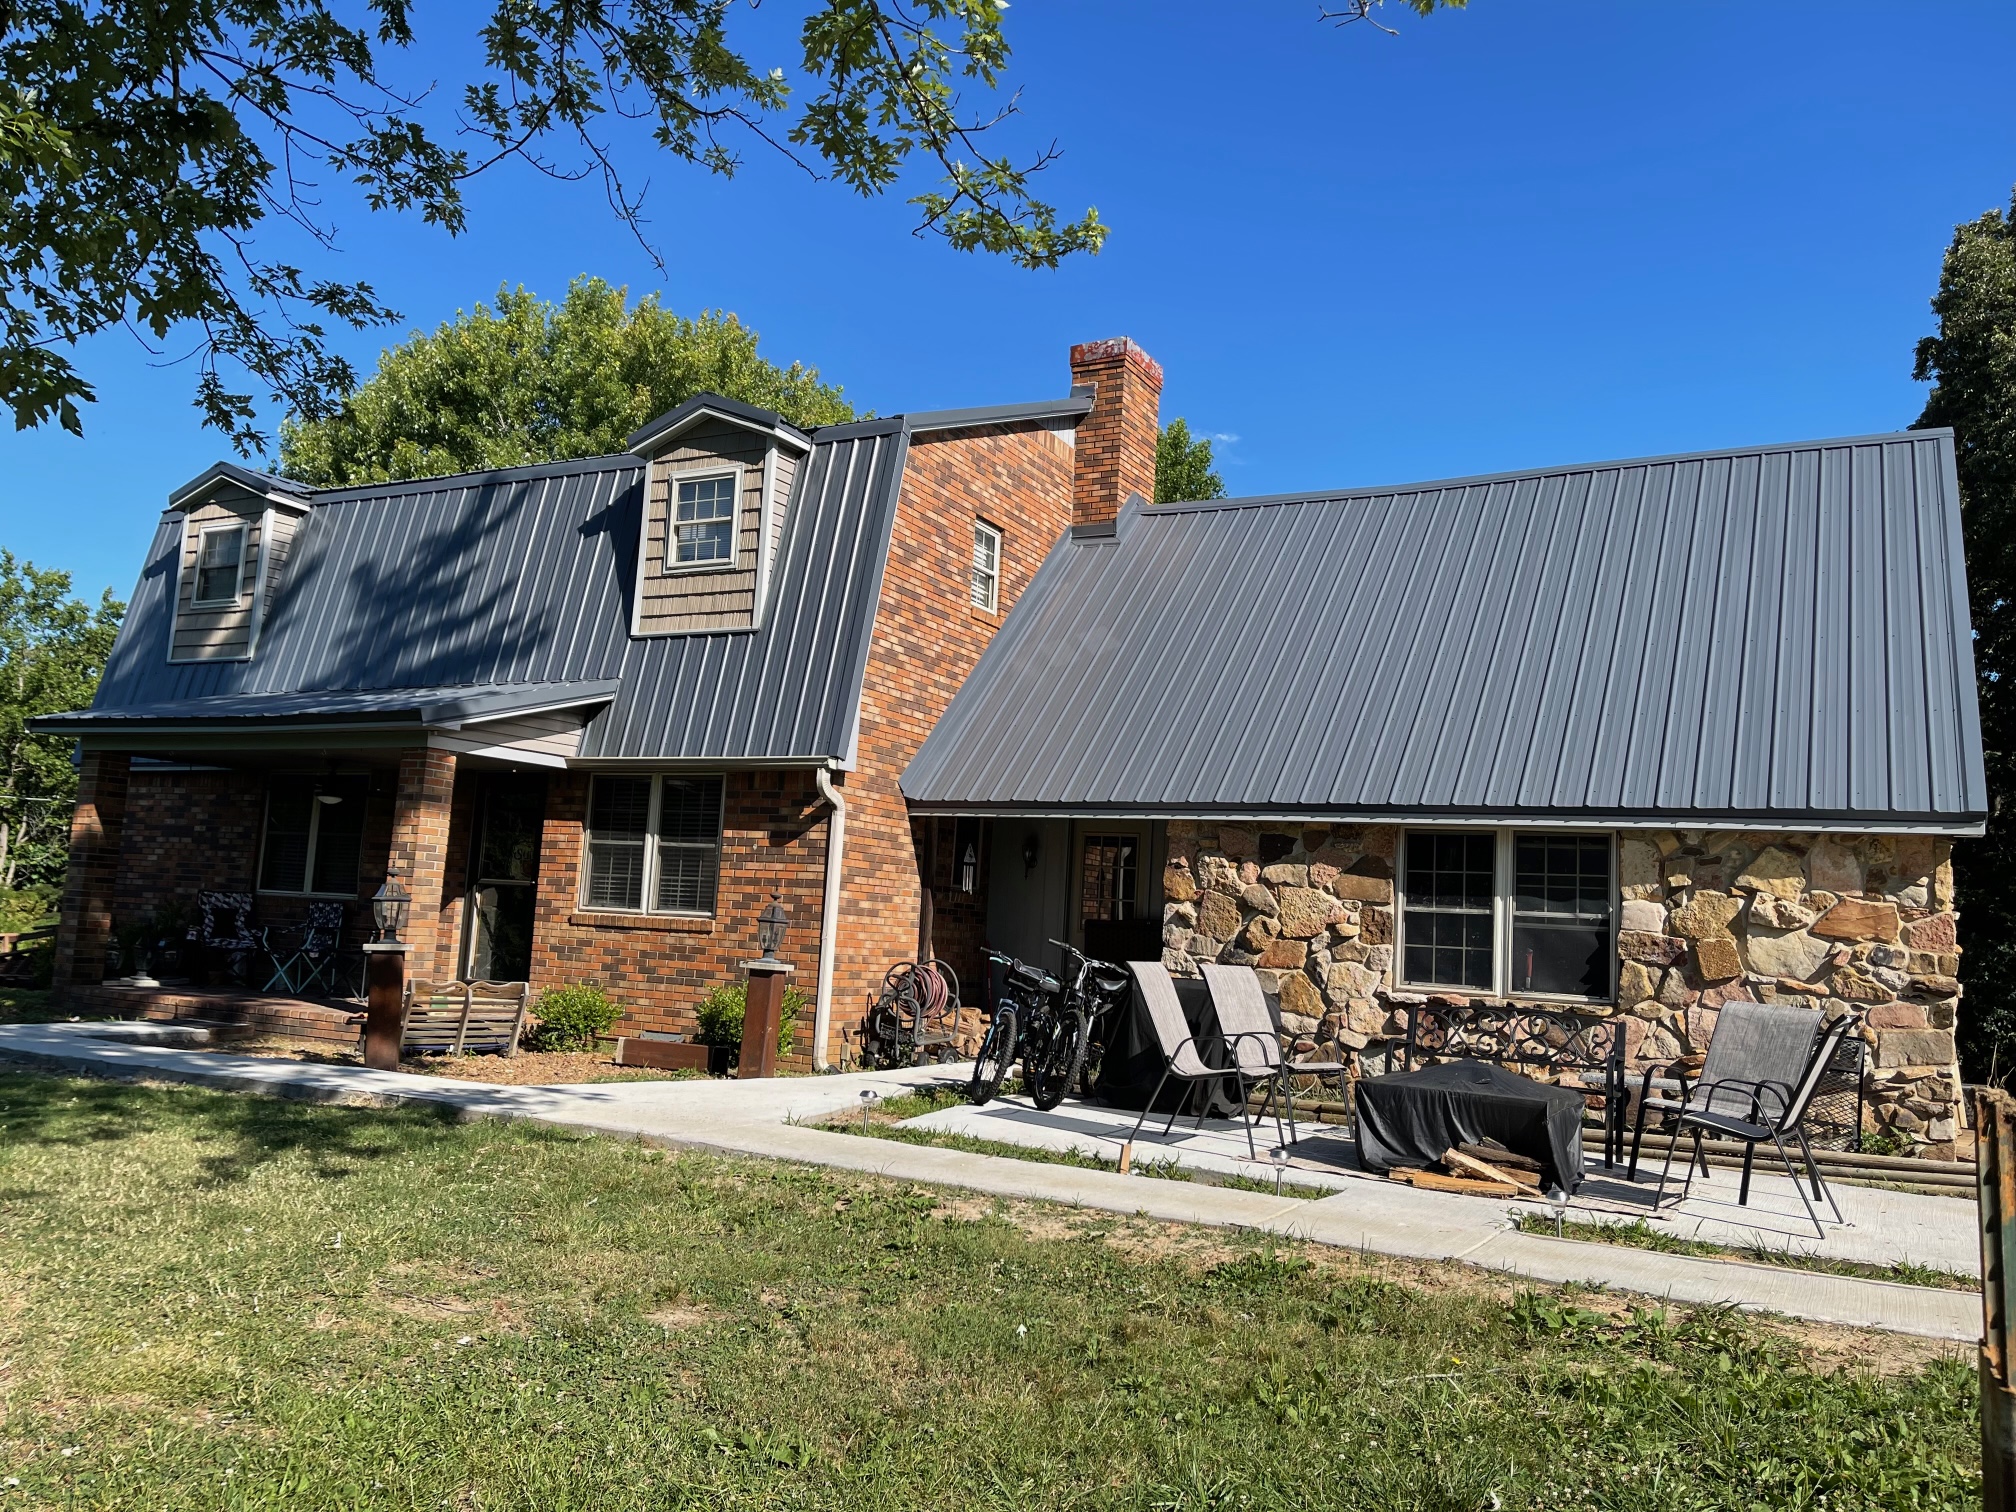 brick home with metal roofing and patio in front with furniture